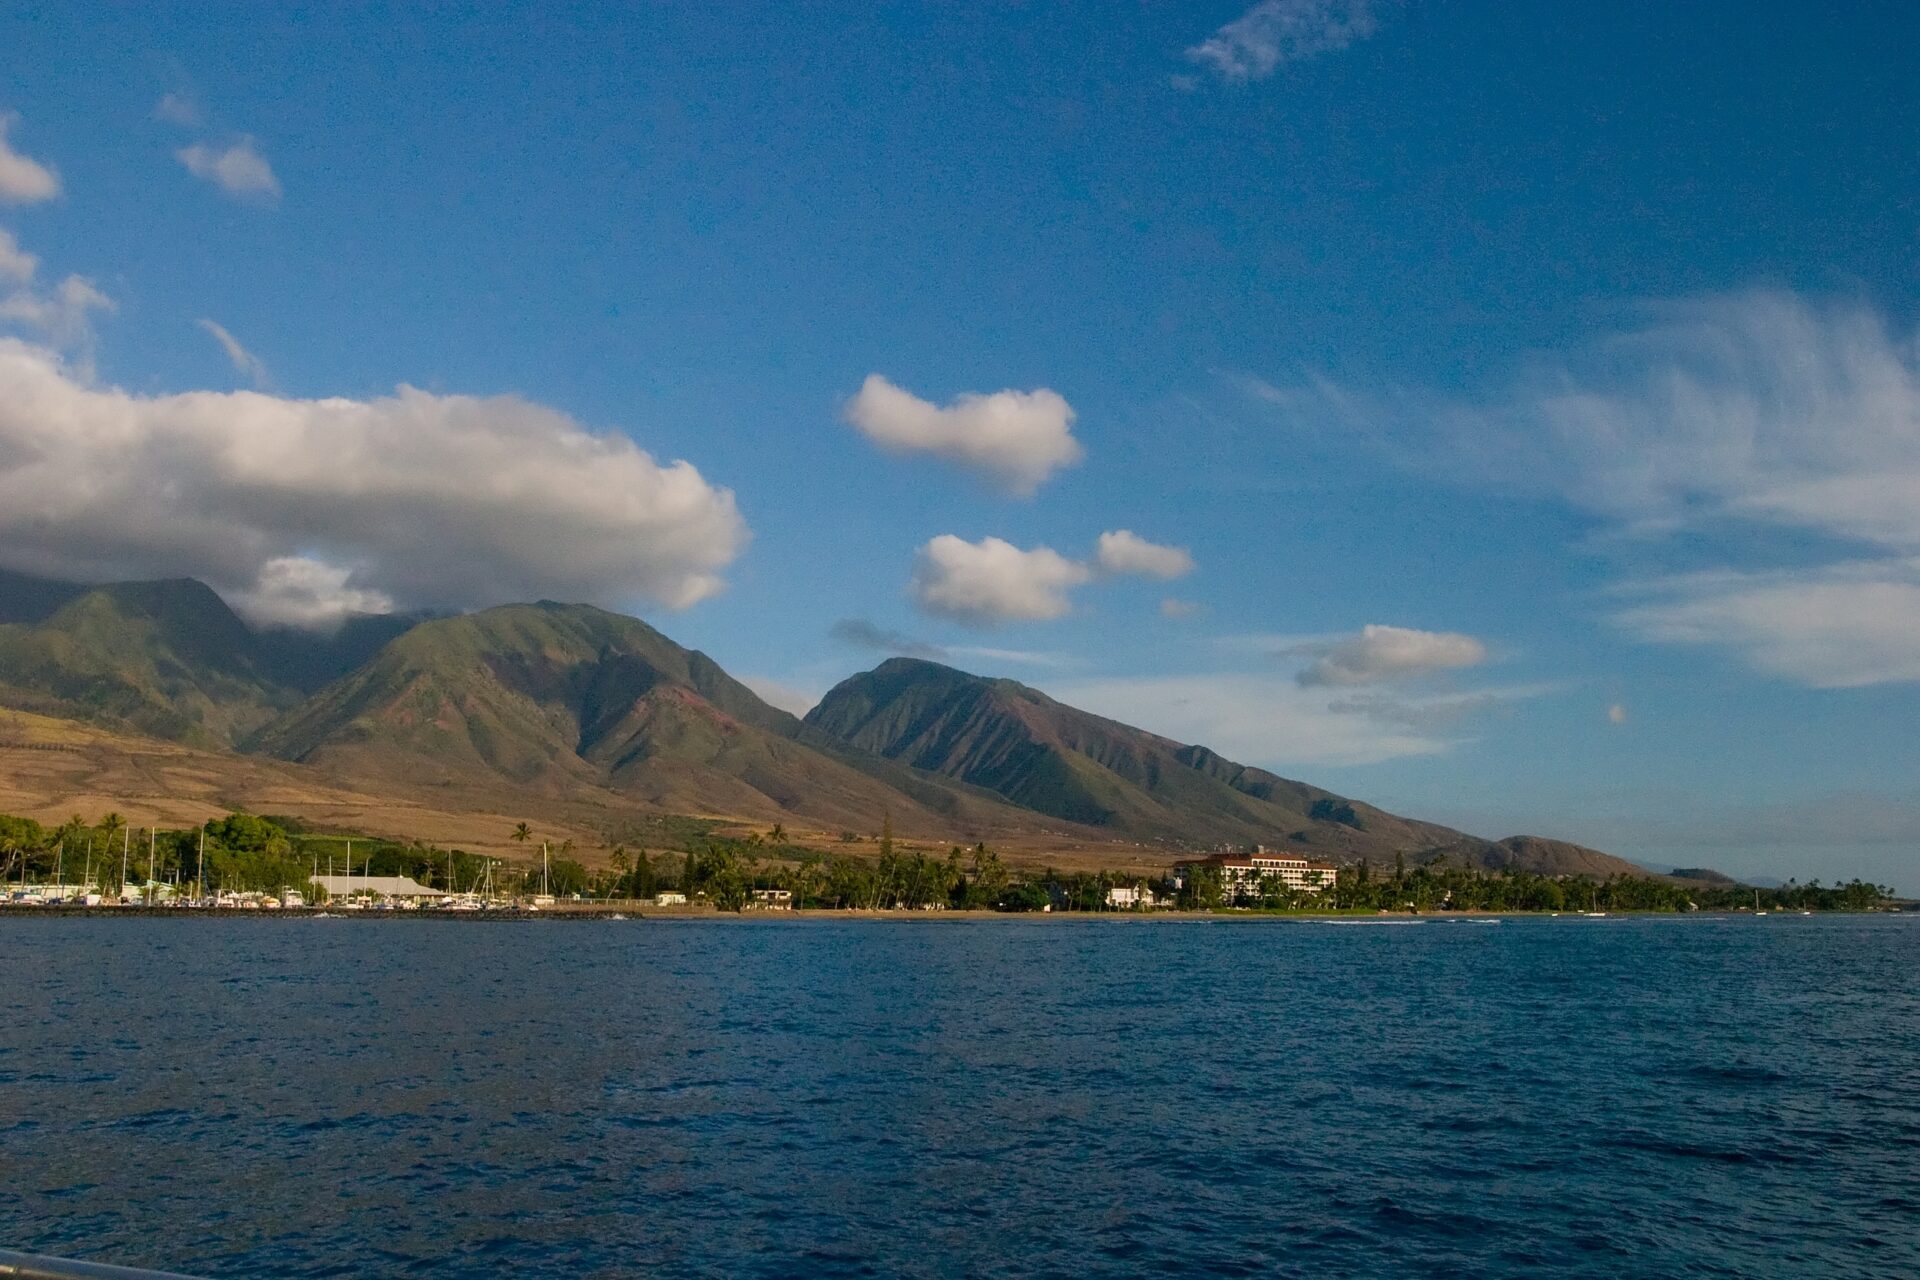 View of Lahaina and Puamana from the sea.